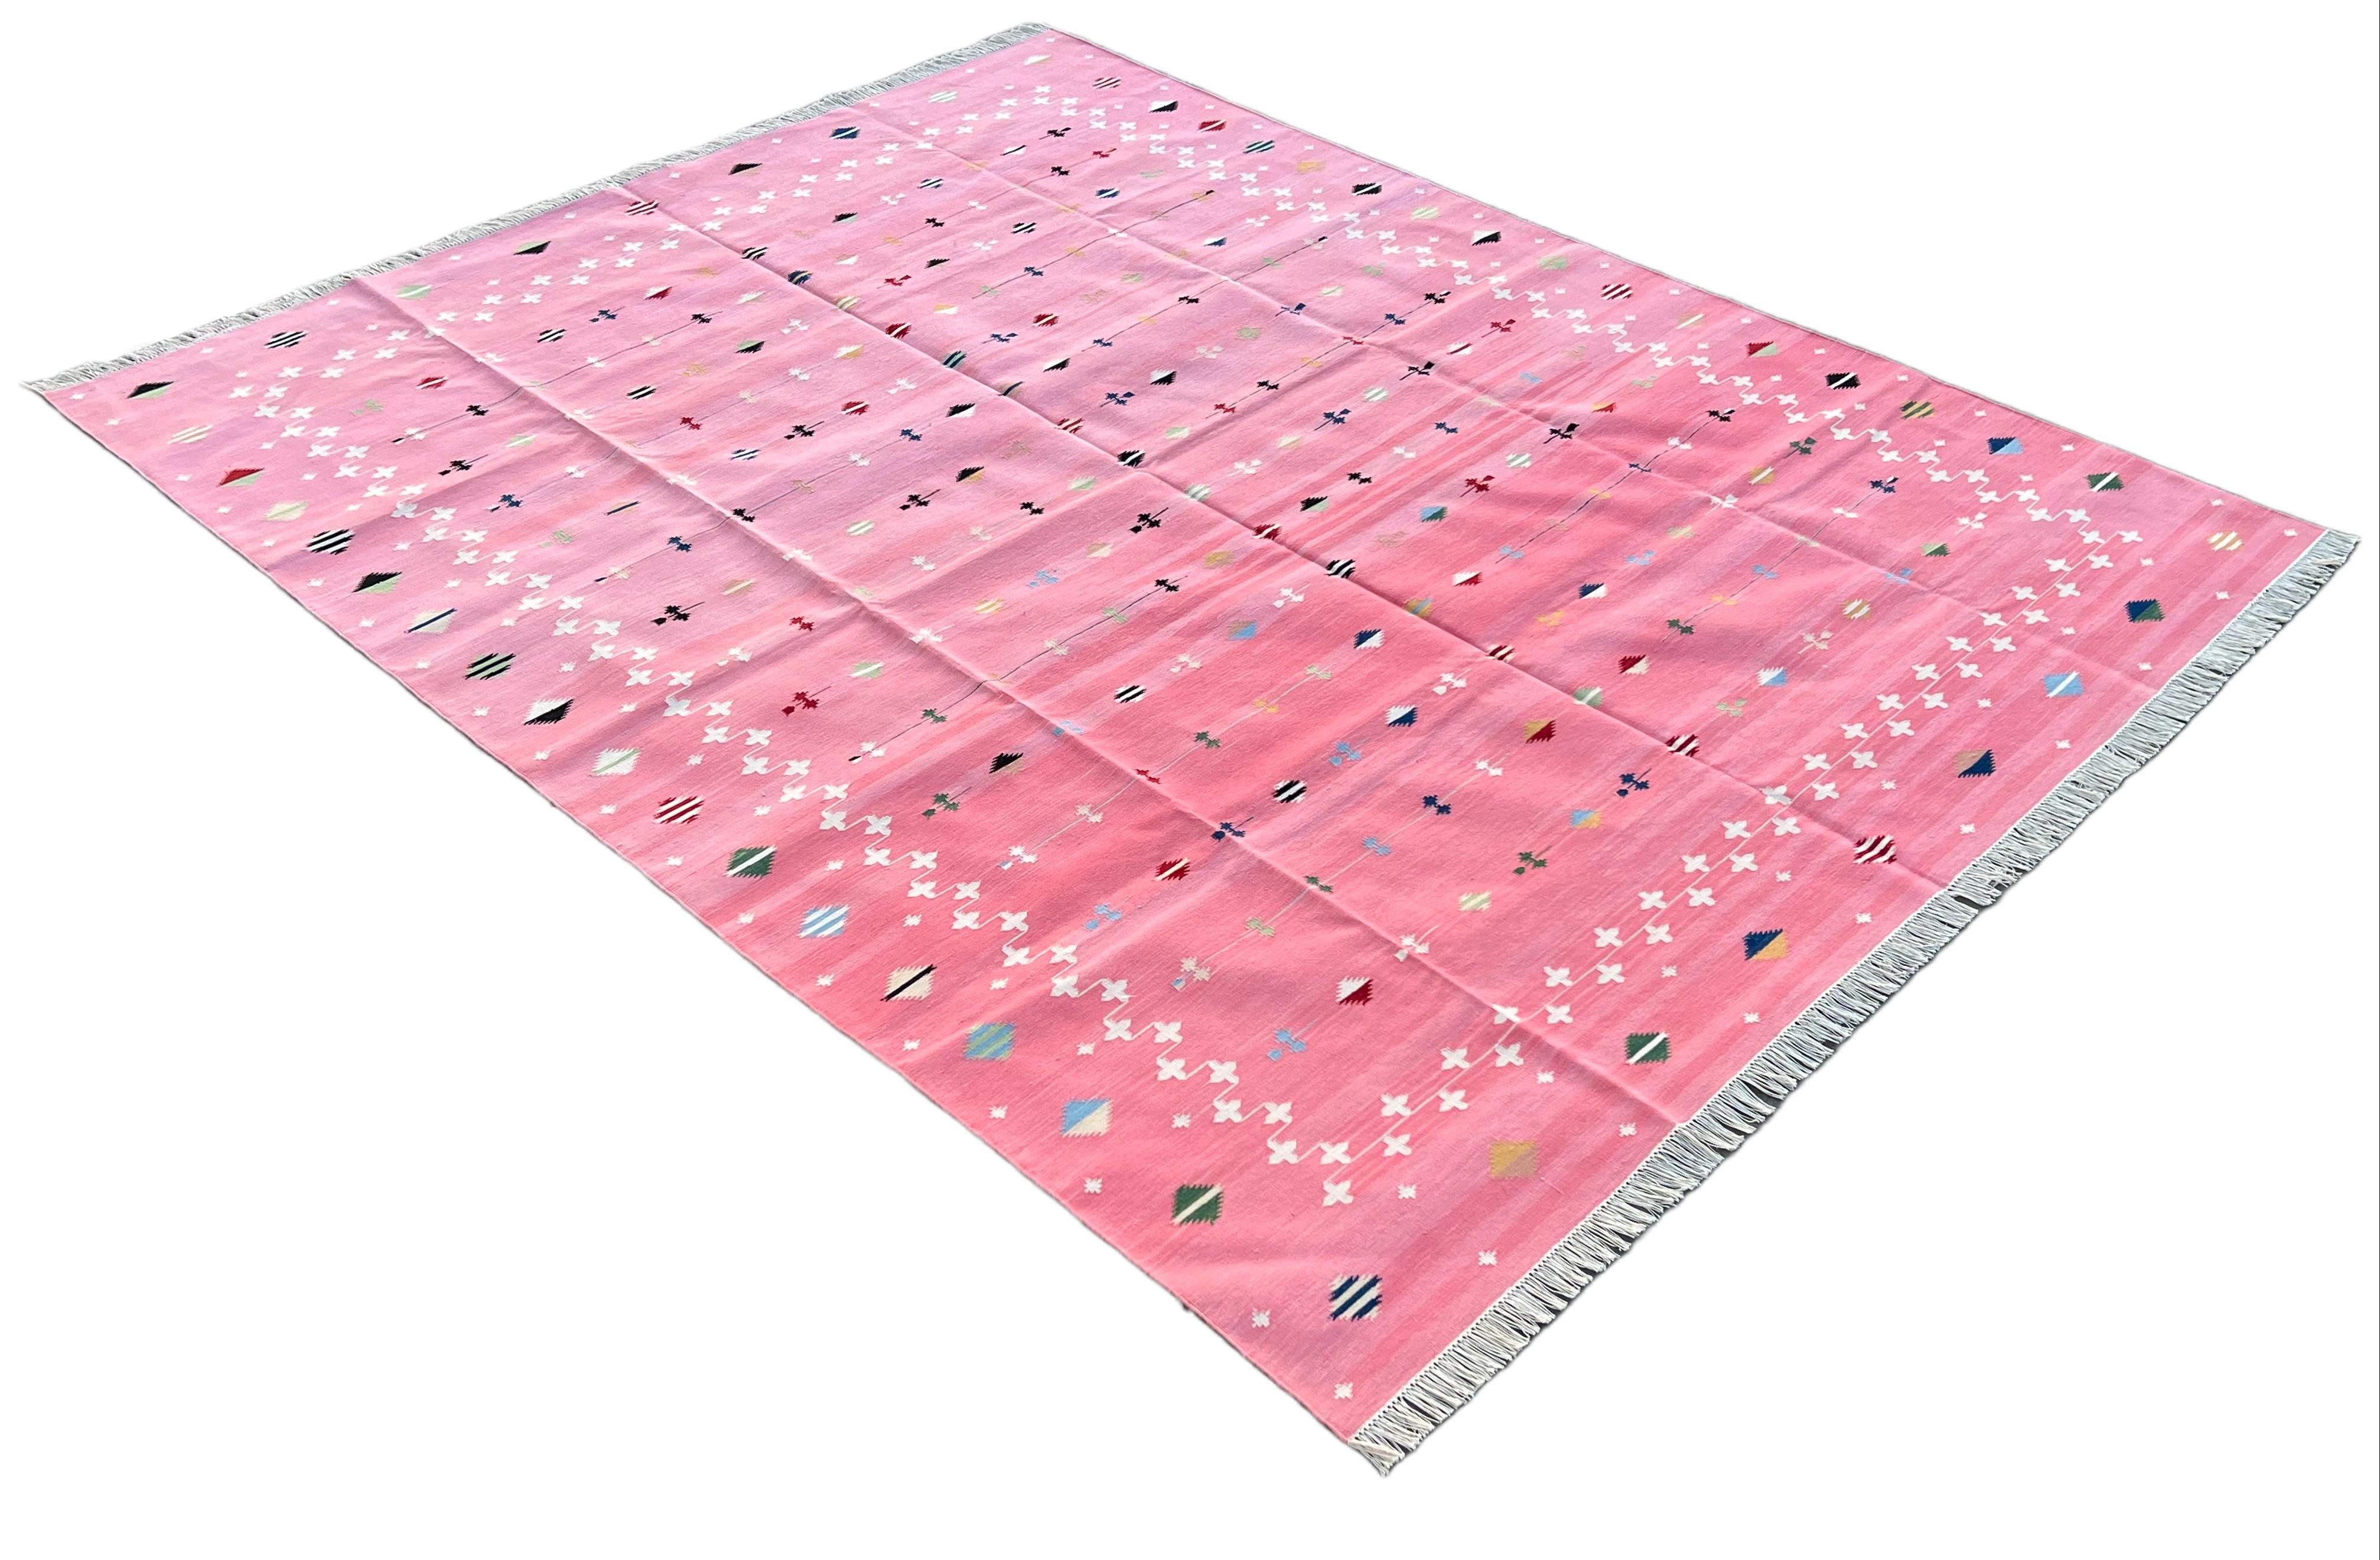 Cotton Vegetable Dyed Reversible Pink And White Indian Shooting Star Rug - 8'x10'
These special flat-weave dhurries are hand-woven with 15 ply 100% cotton yarn. Due to the special manufacturing techniques used to create our rugs, the size and color